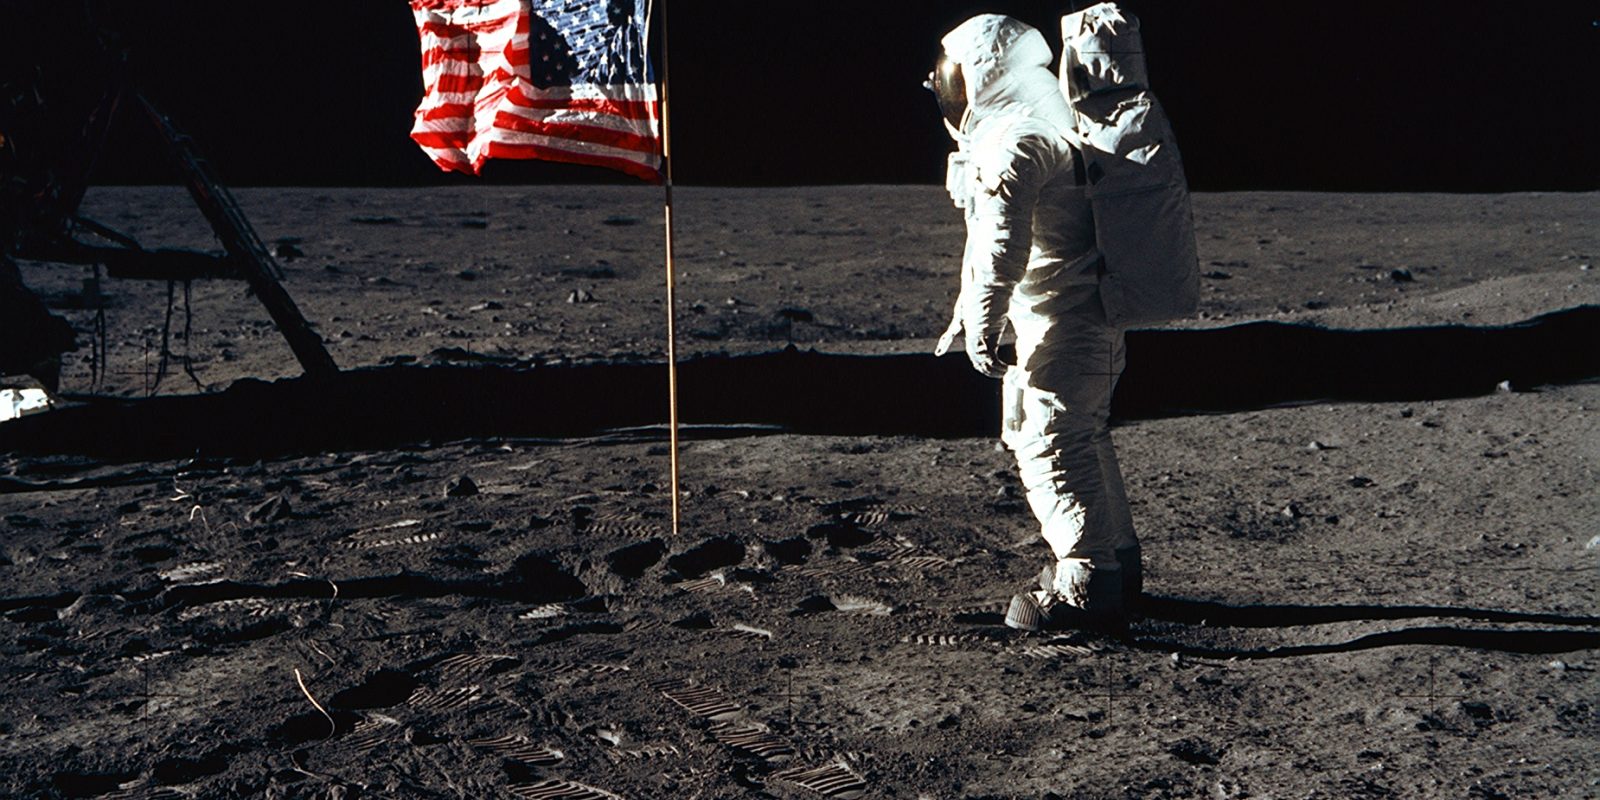 376713 03: (FILE PHOTO) Astronaut Edwin E. Aldrin, Jr., the lunar module pilot of the first lunar landing mission, stands next to a United States flag July 20, 1969 during an Apollo 11 Extravehicular Activity (EVA) on the surface of the Moon. The 30th anniversary of Apollo's moon landing is celebrated July 20, 1999. (Photo by NASA/Newsmakers)